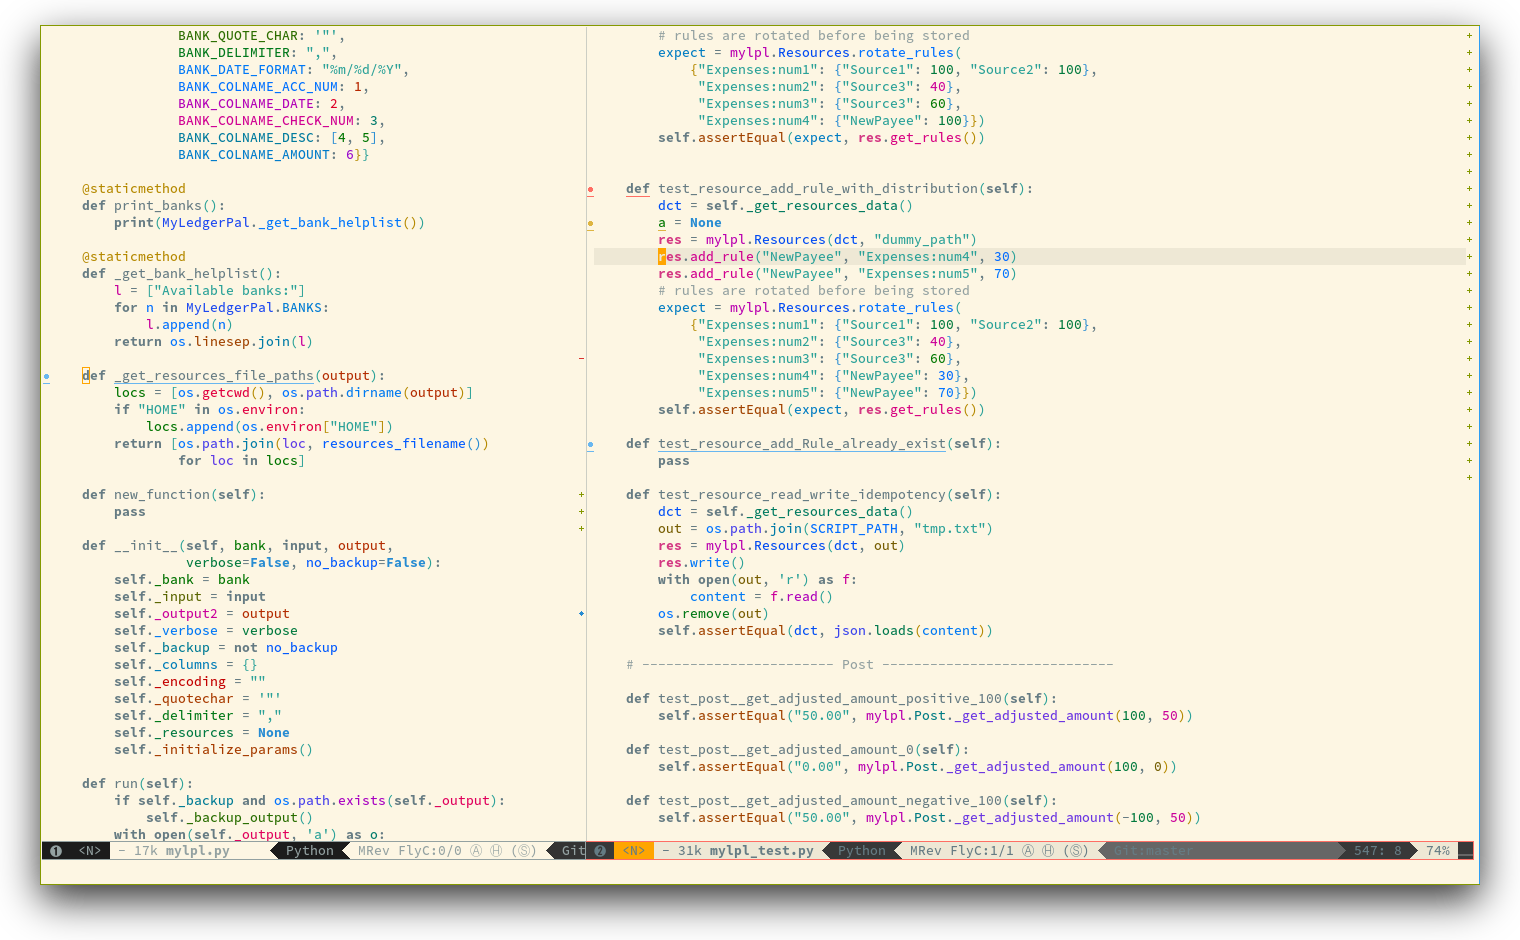 /TakeV/spacemacs/media/commit/21146f4fed970bf8e3acd41fafb7d451ac6d48ed/layers/colors/img/theme-tweaks-python.png